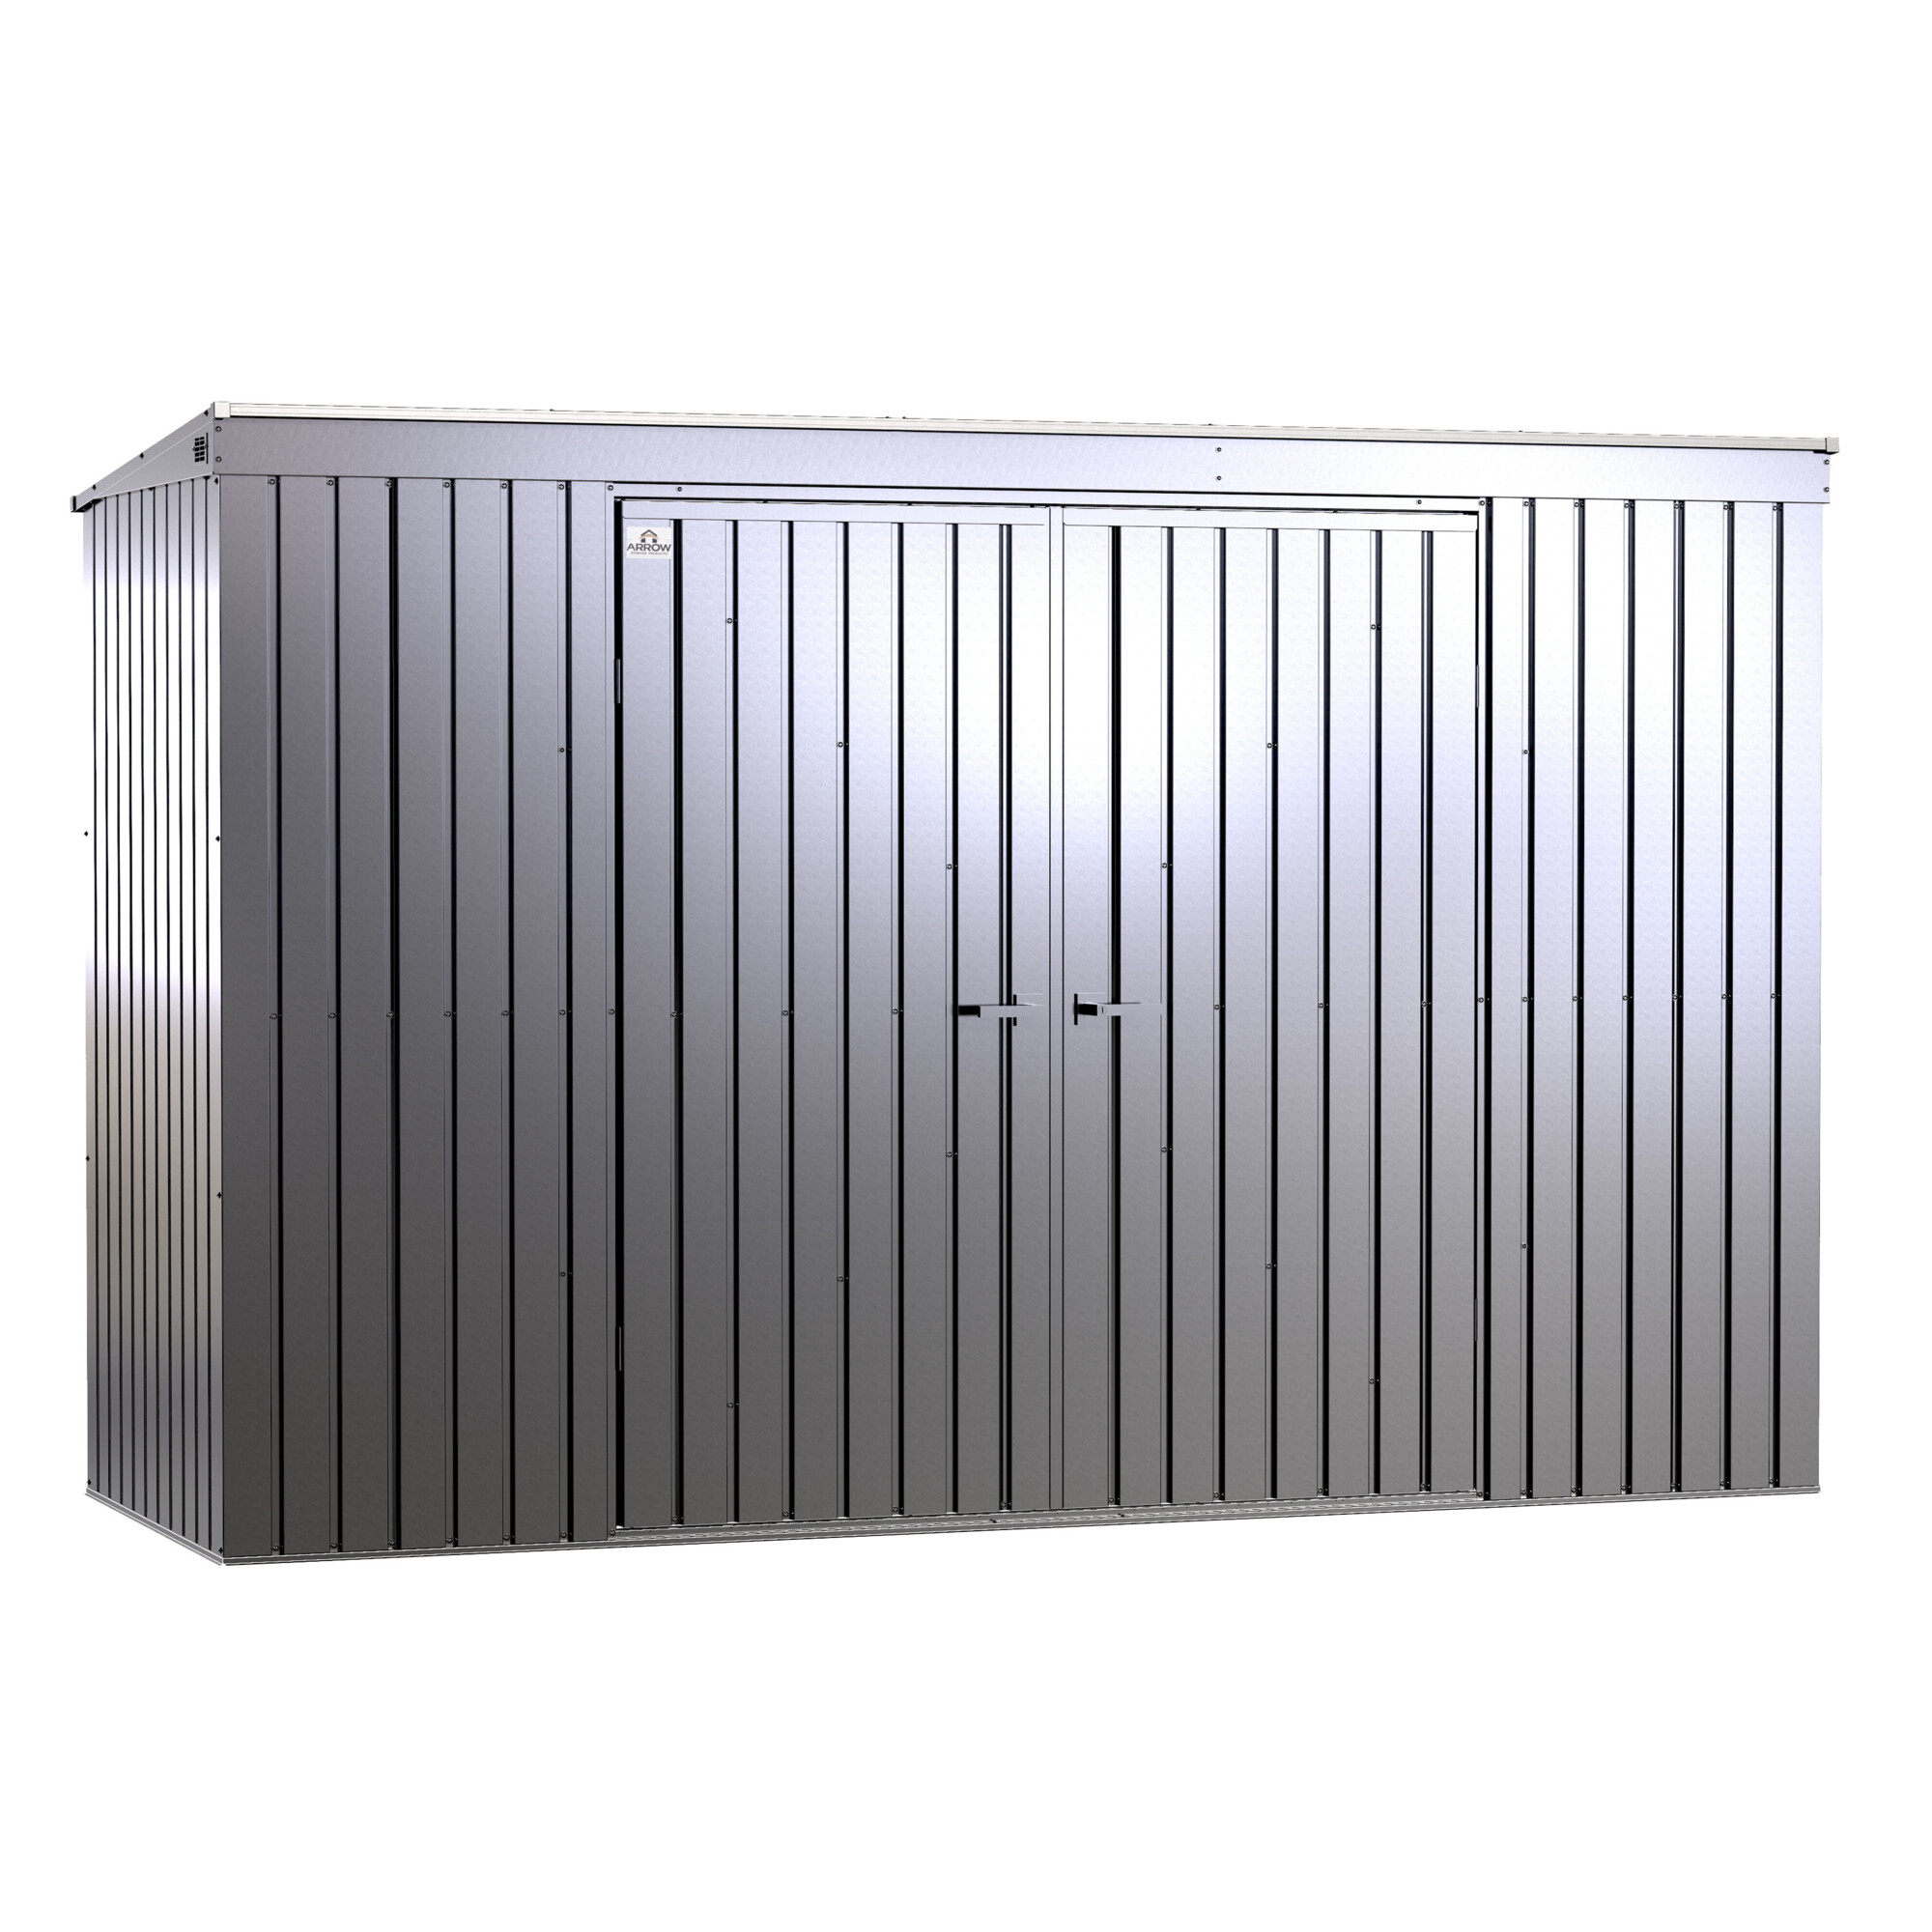 Arrow Storage Products, Elite Steel Storage Shed, 10x4 Galvalume, Length 3.9 ft, Width 10.1 ft, Model EP104AB